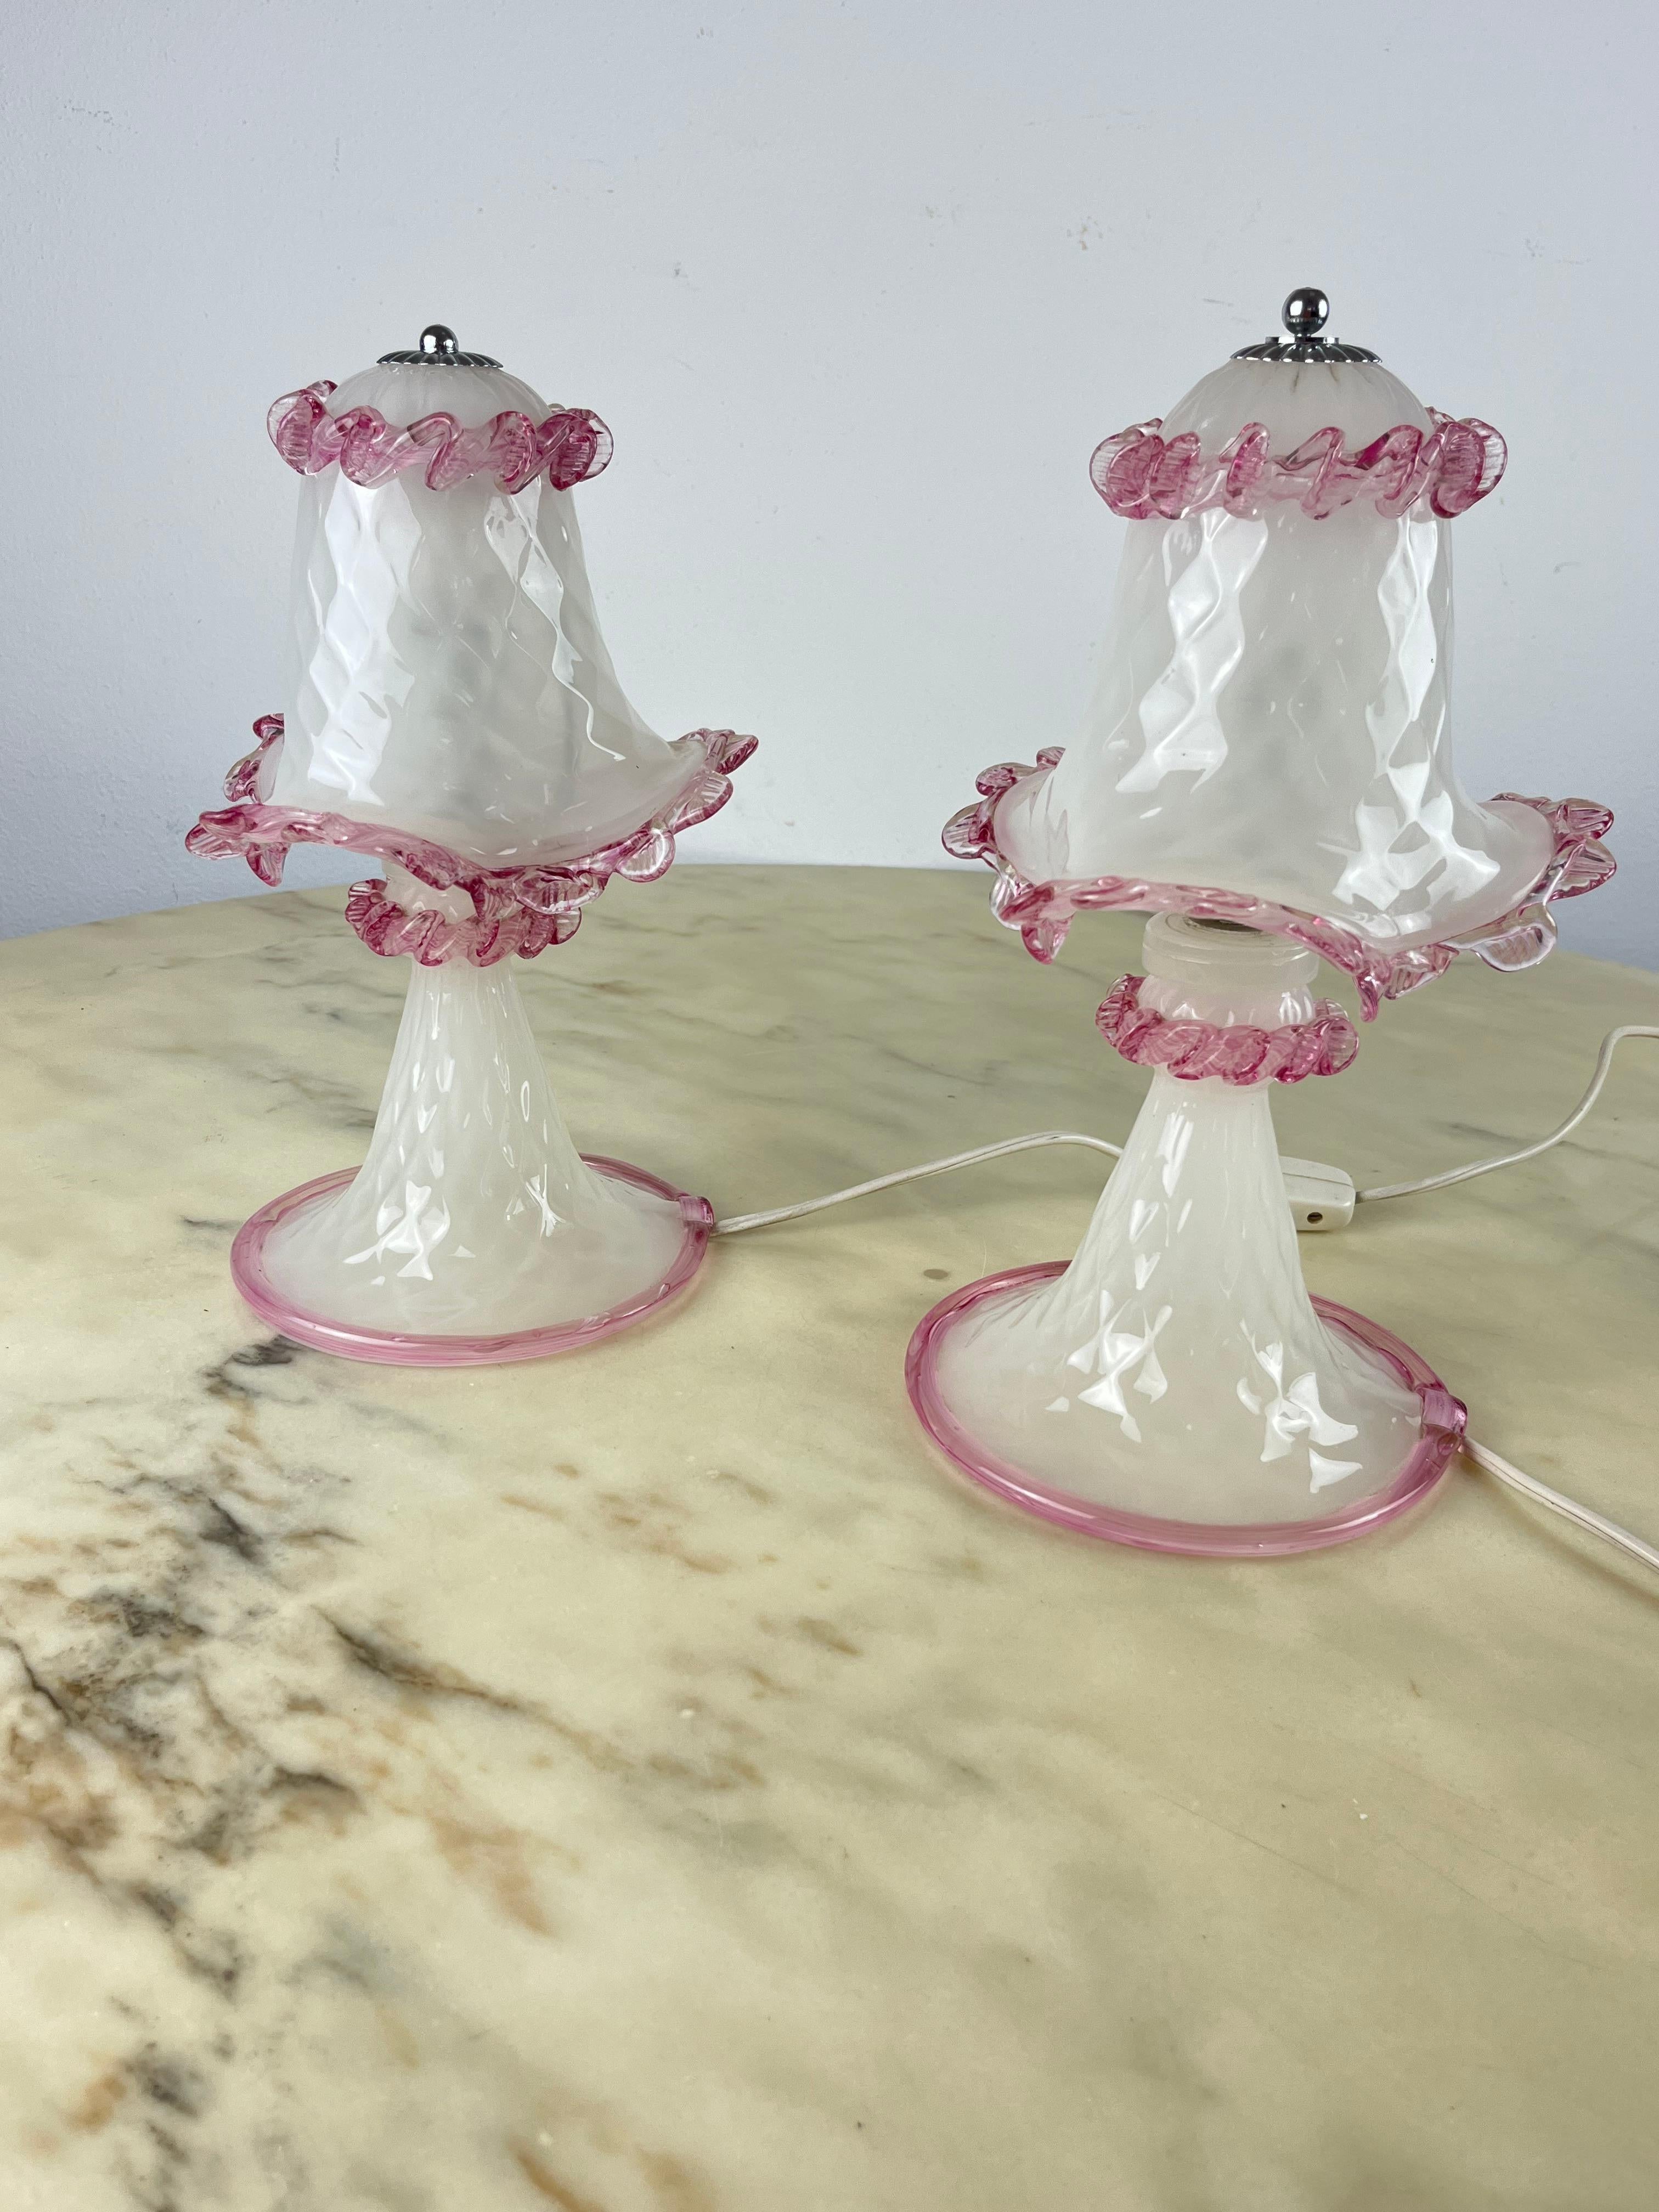 Italian Pair of Murano Glass Bedside Lamps, Italy, 1980s For Sale